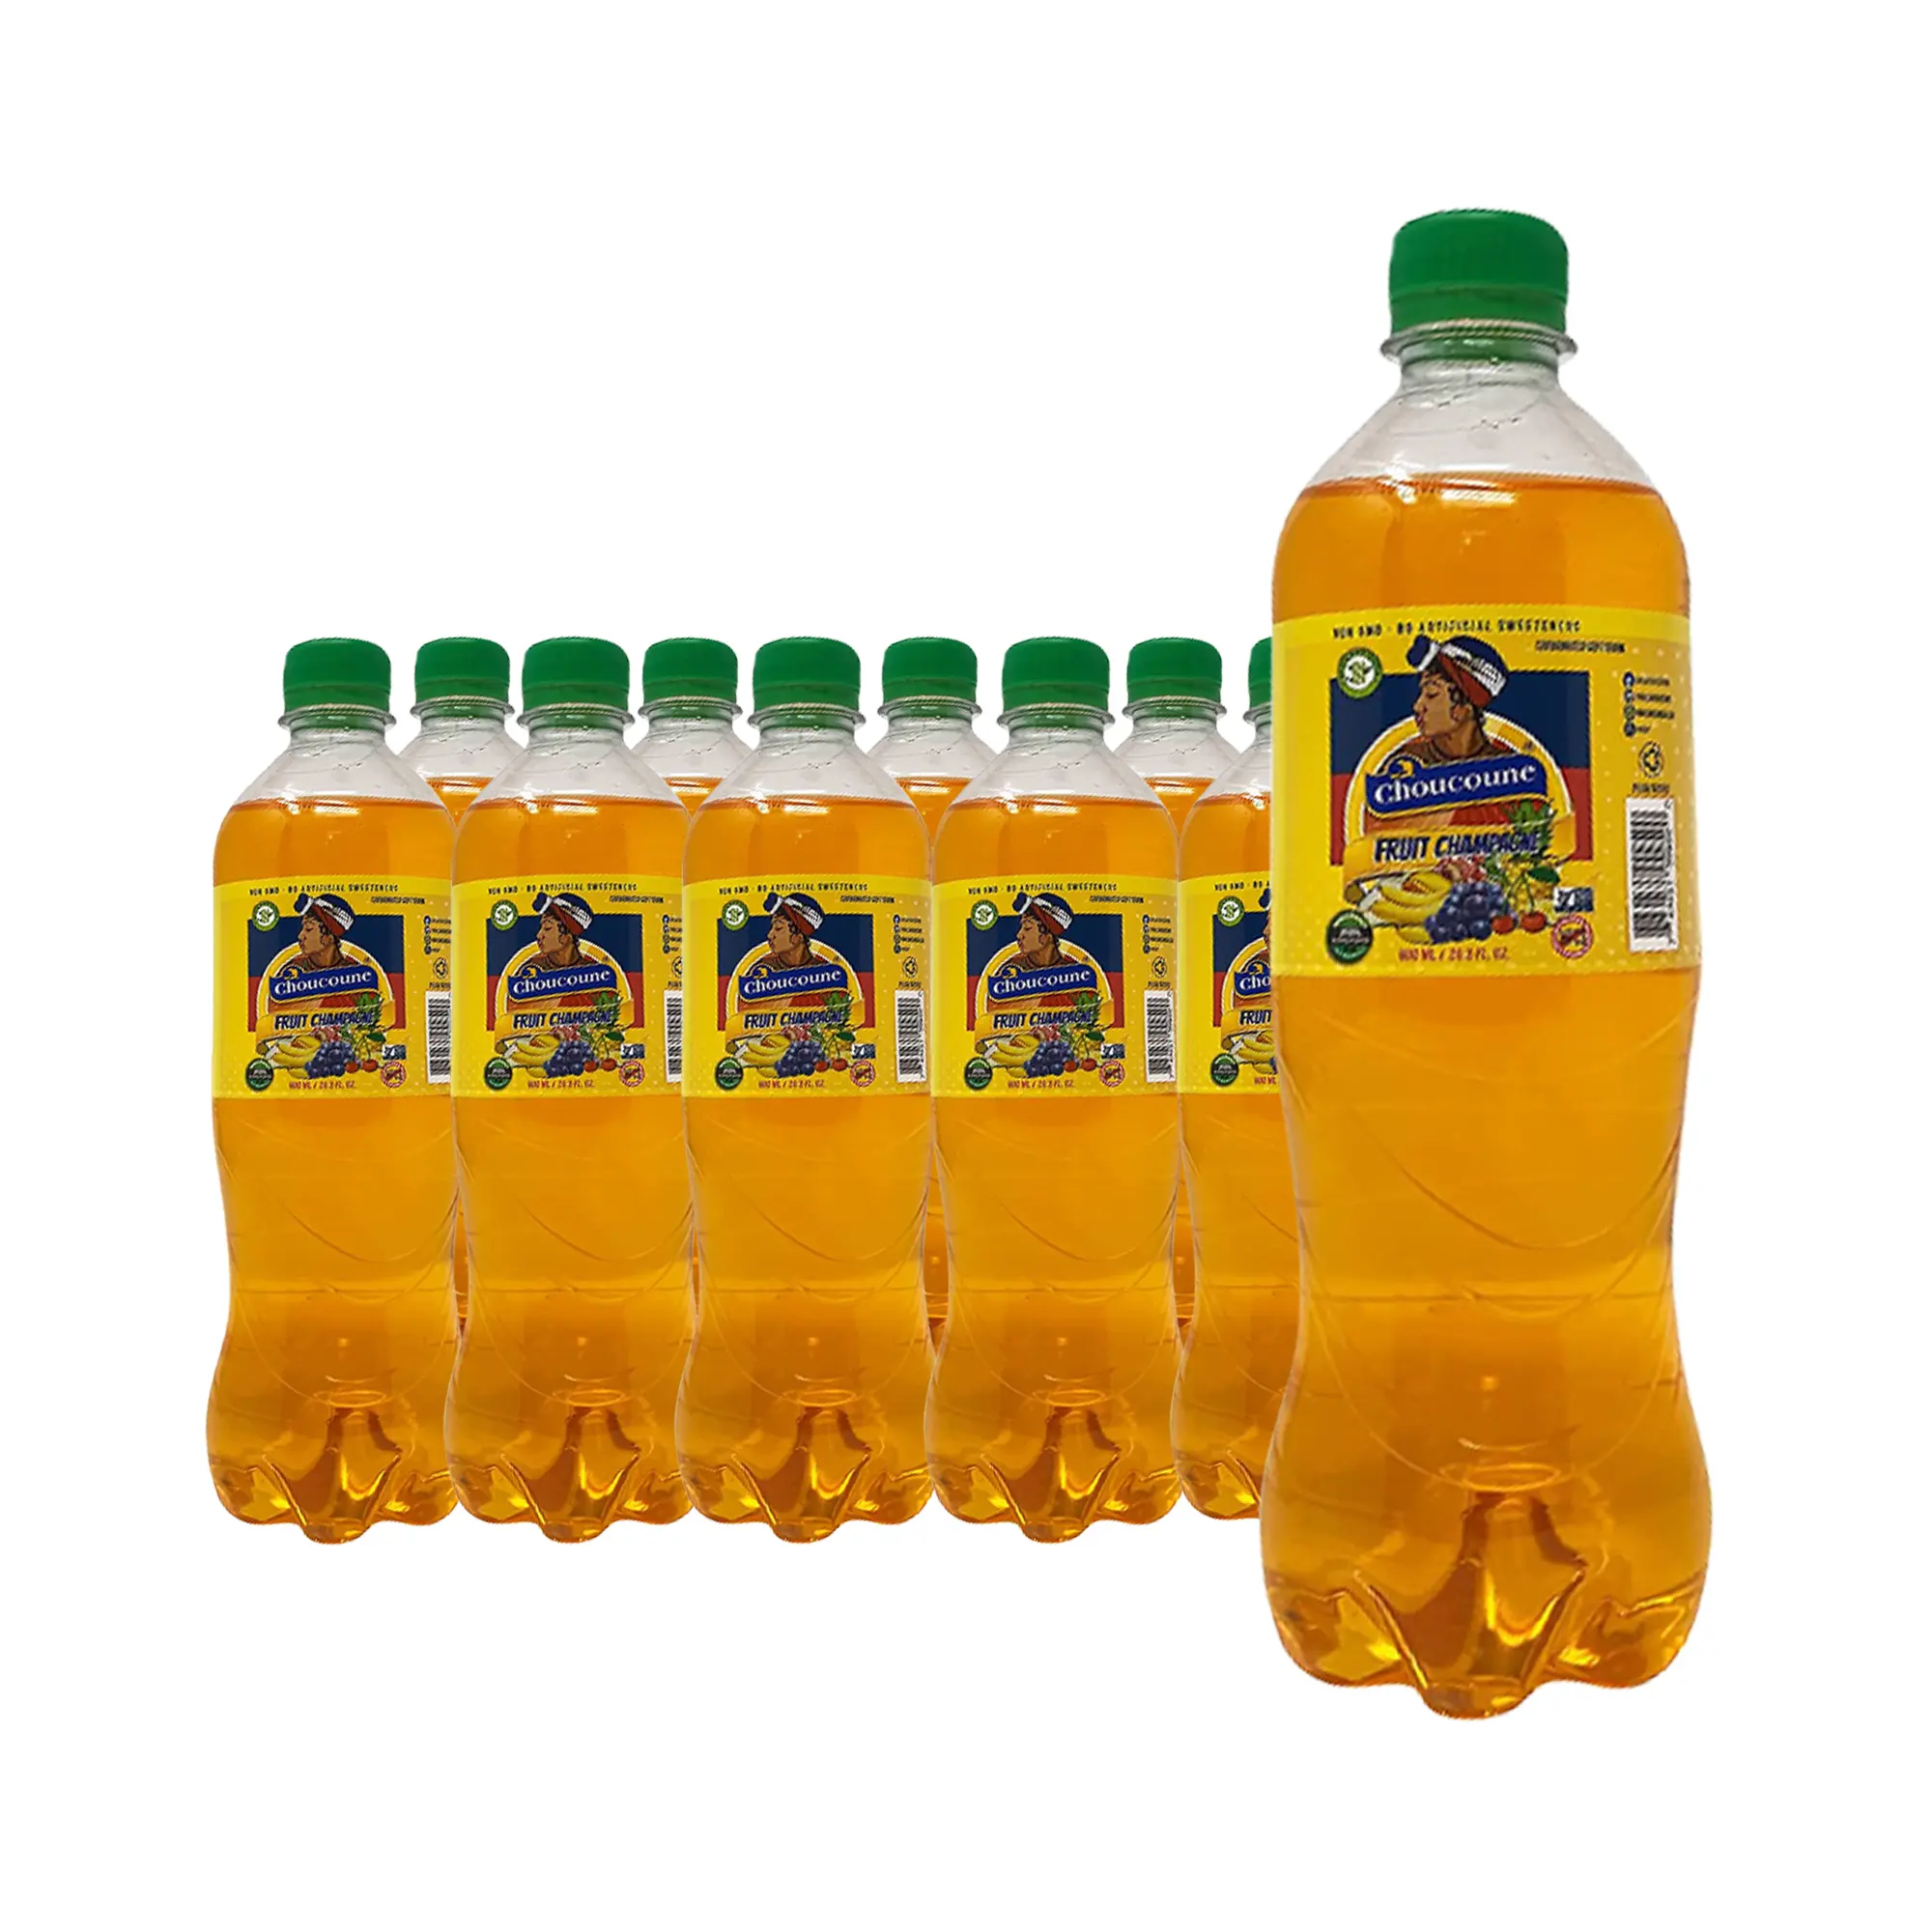 Best Quality Best Price Natural Not From Concentrate Manufacturer of Fruit Juice Soft Drink in Different Flavors Bottles